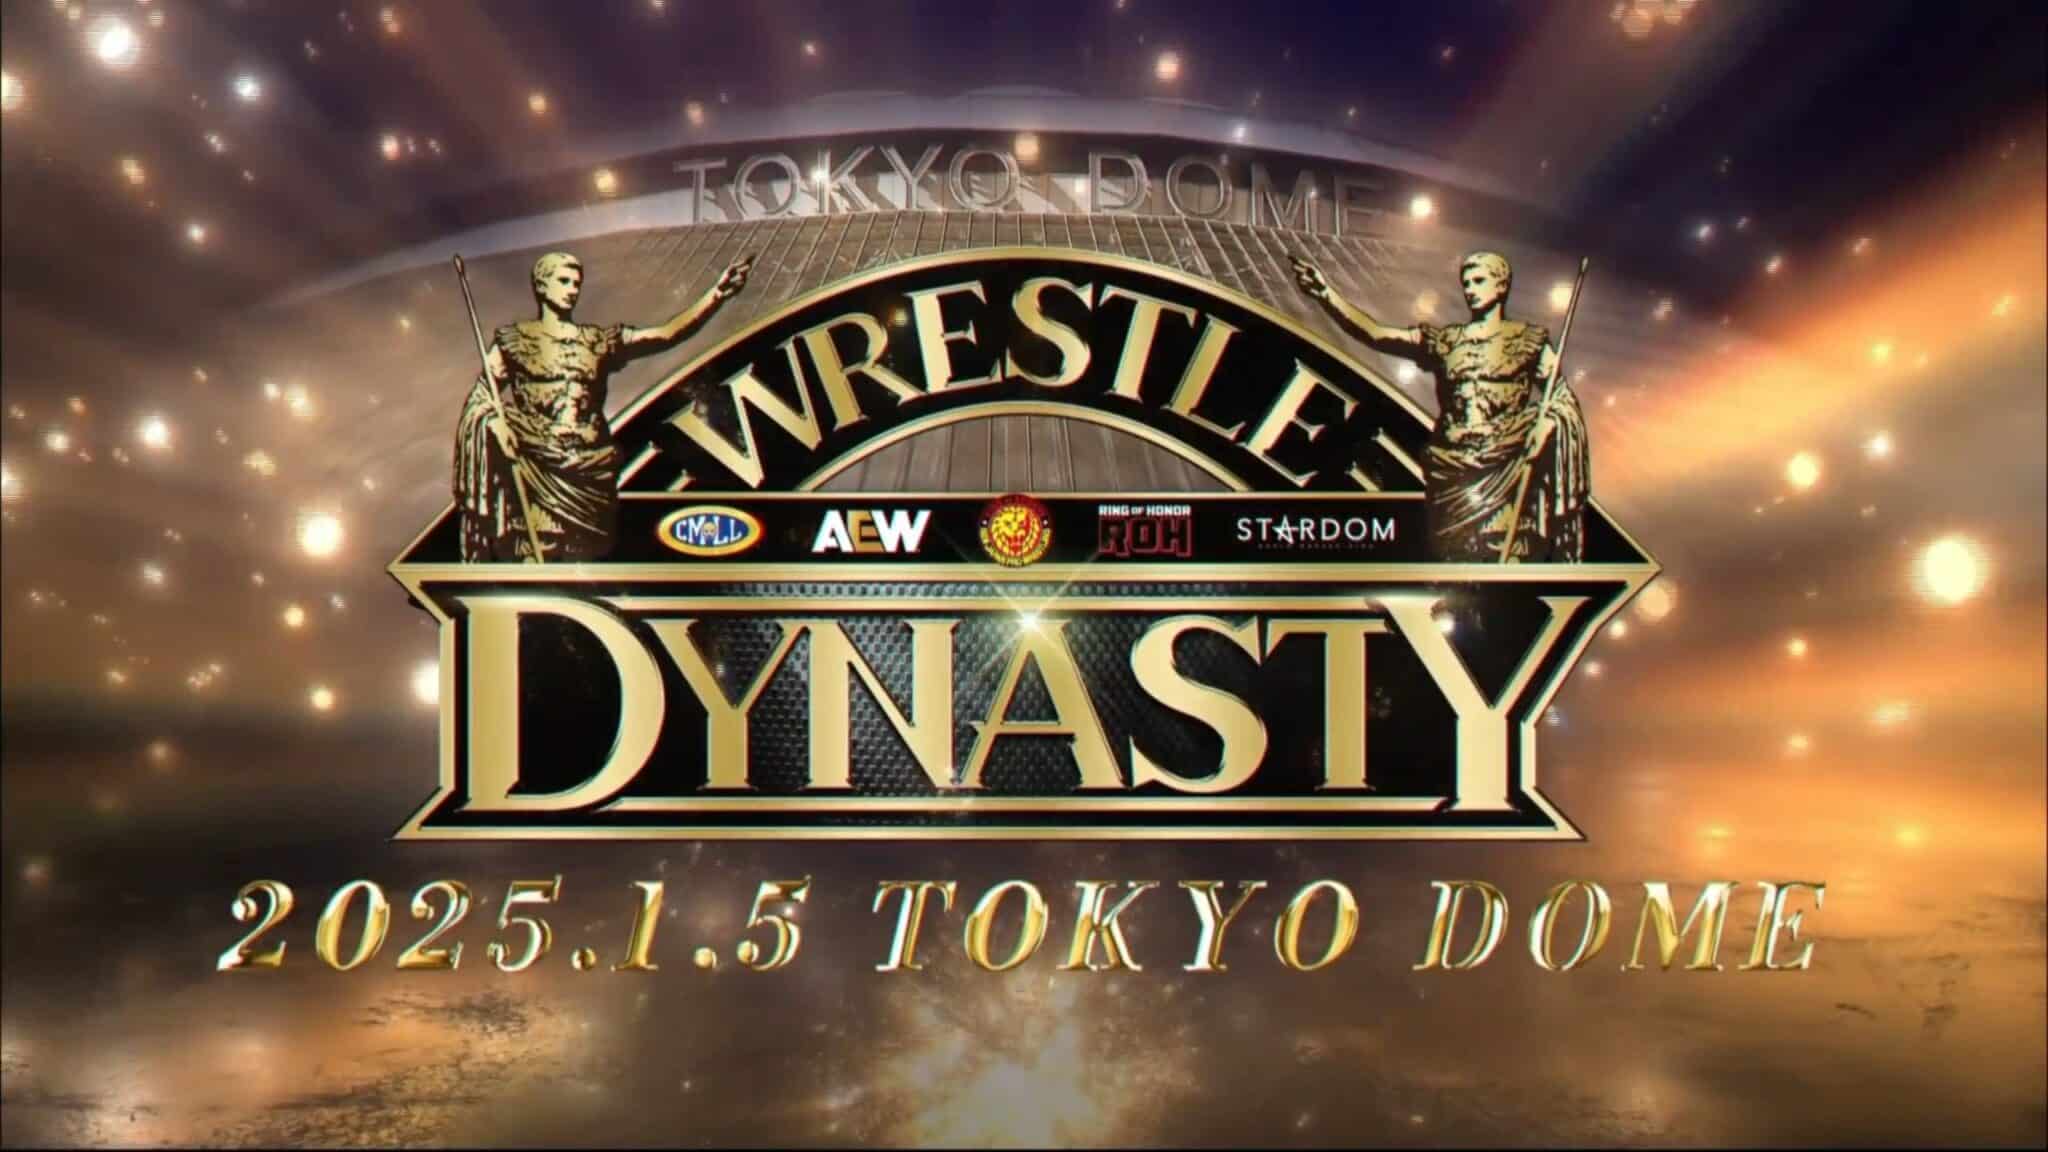 The Tokyo Dome announces a crossover event, Wrestle Dynasty by NJPW, scheduled for January 5, 2025.